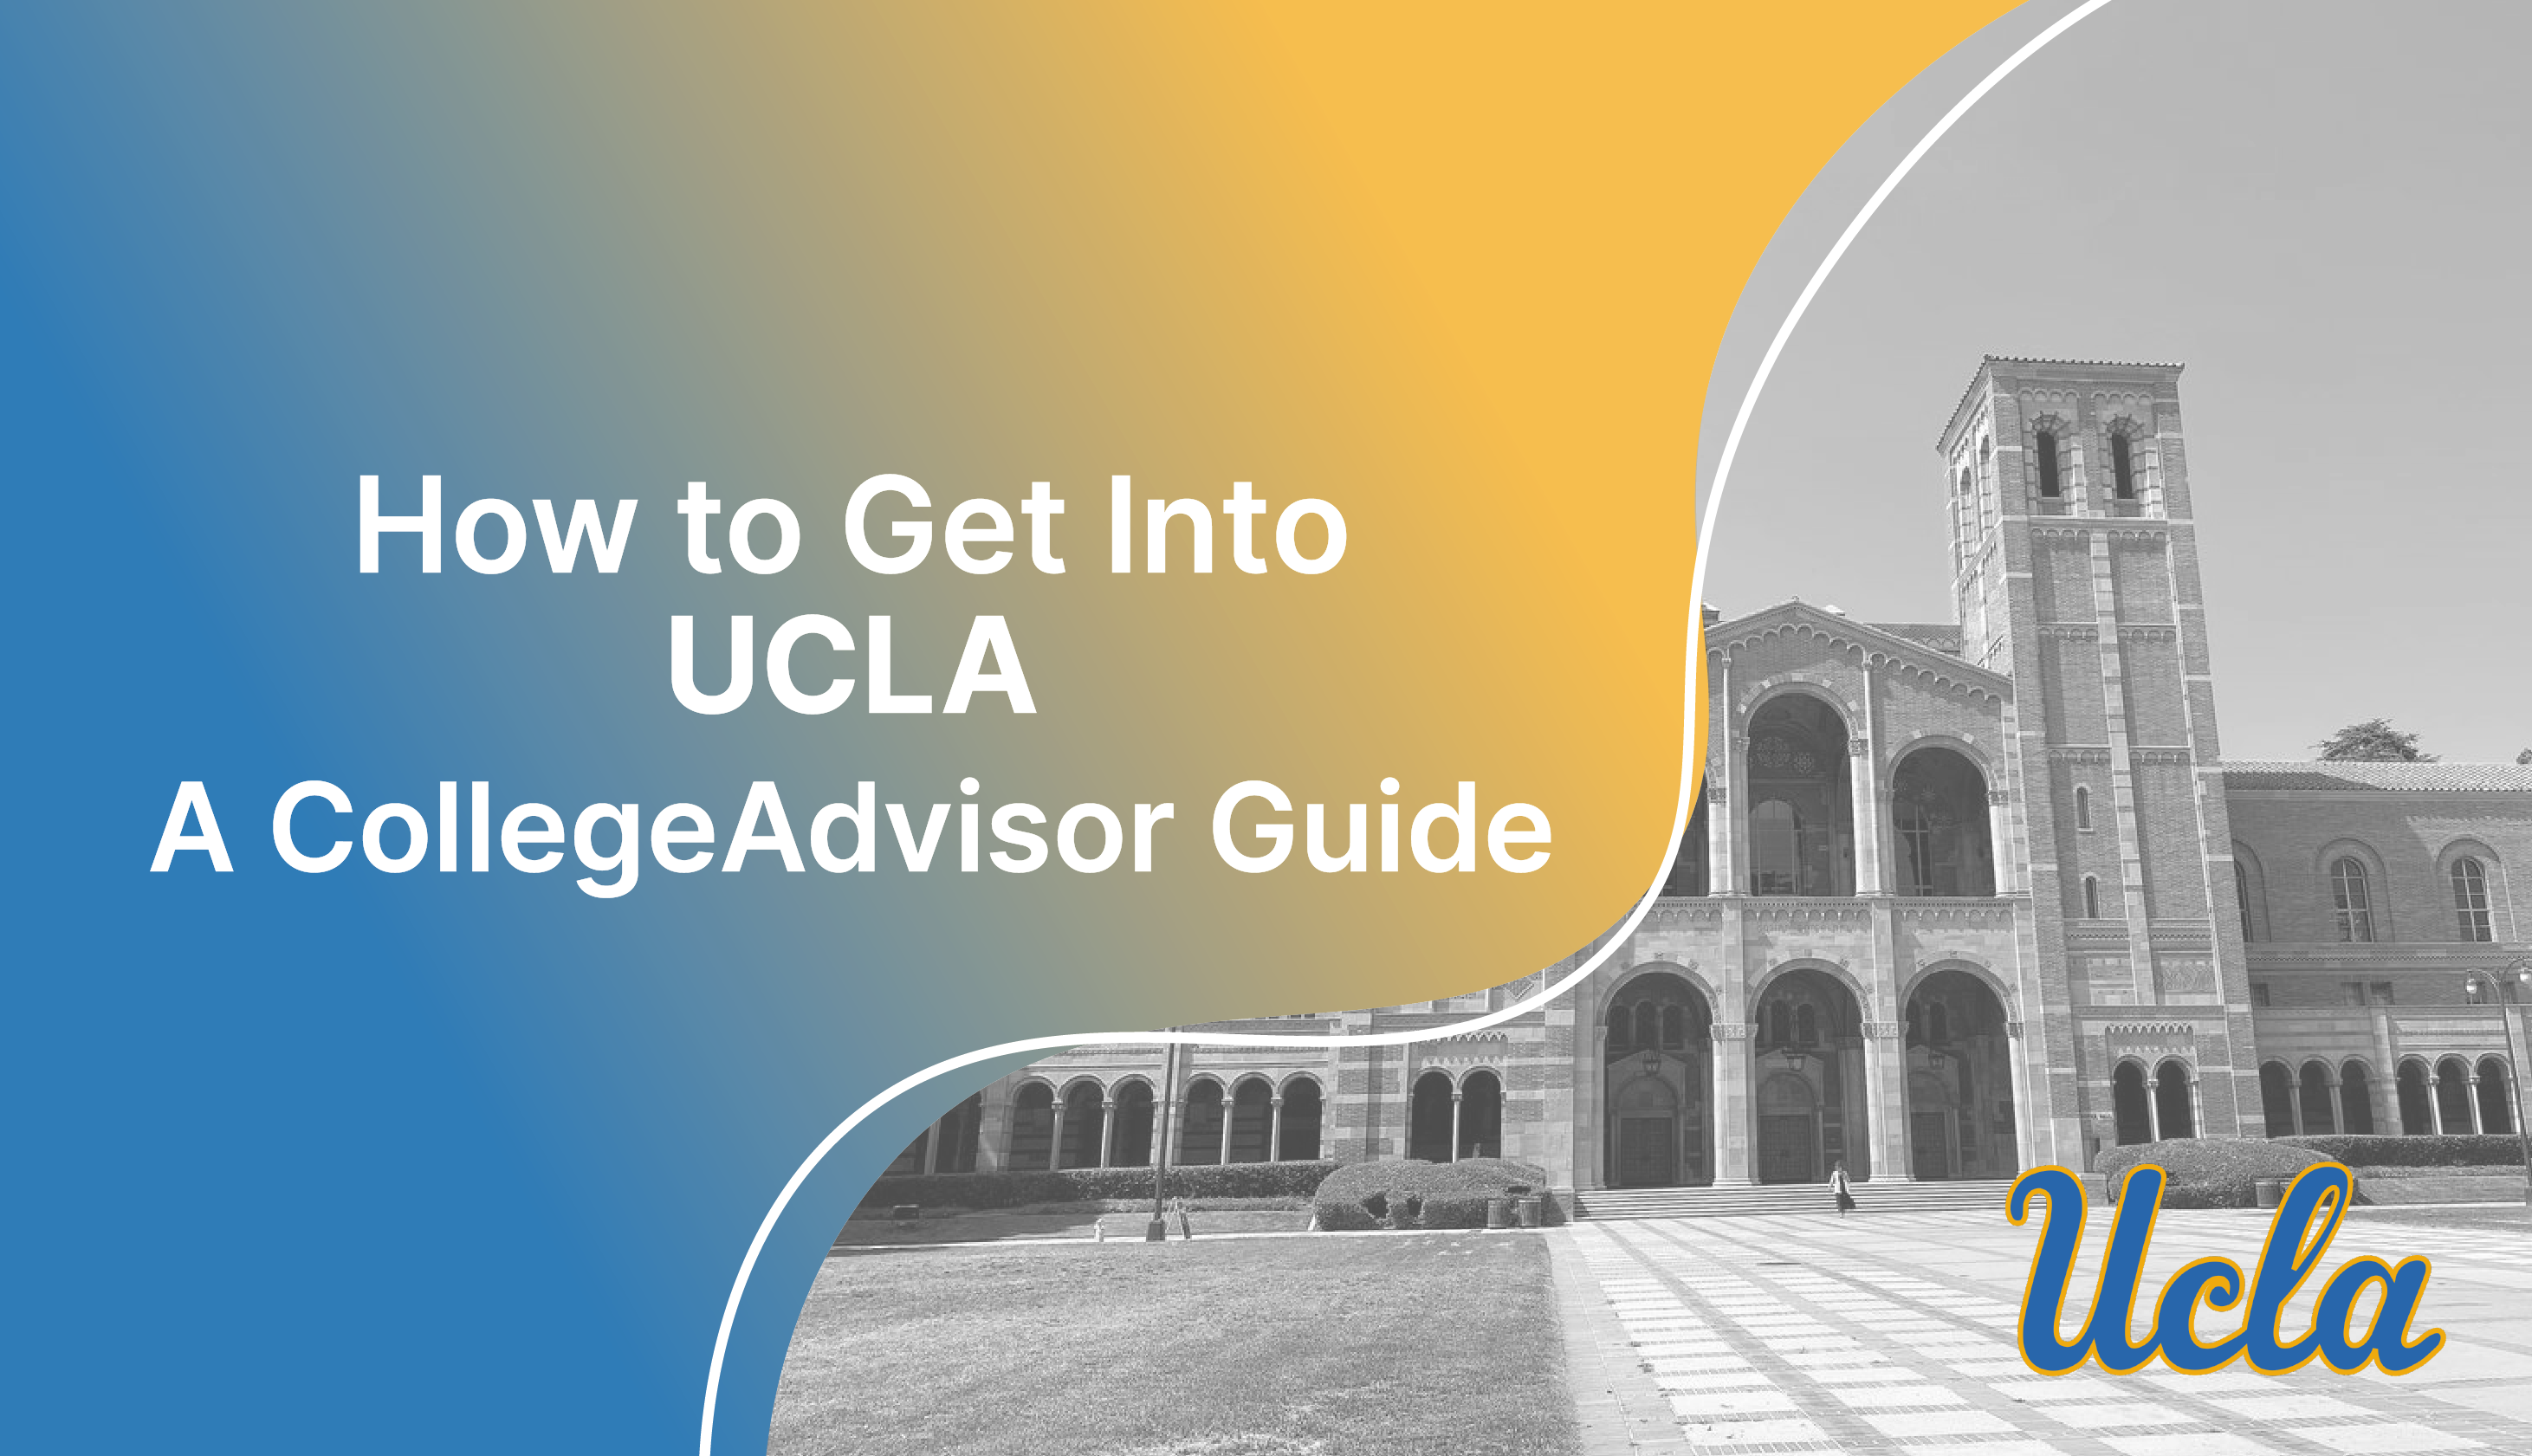 How to Get Into UCLA Guide